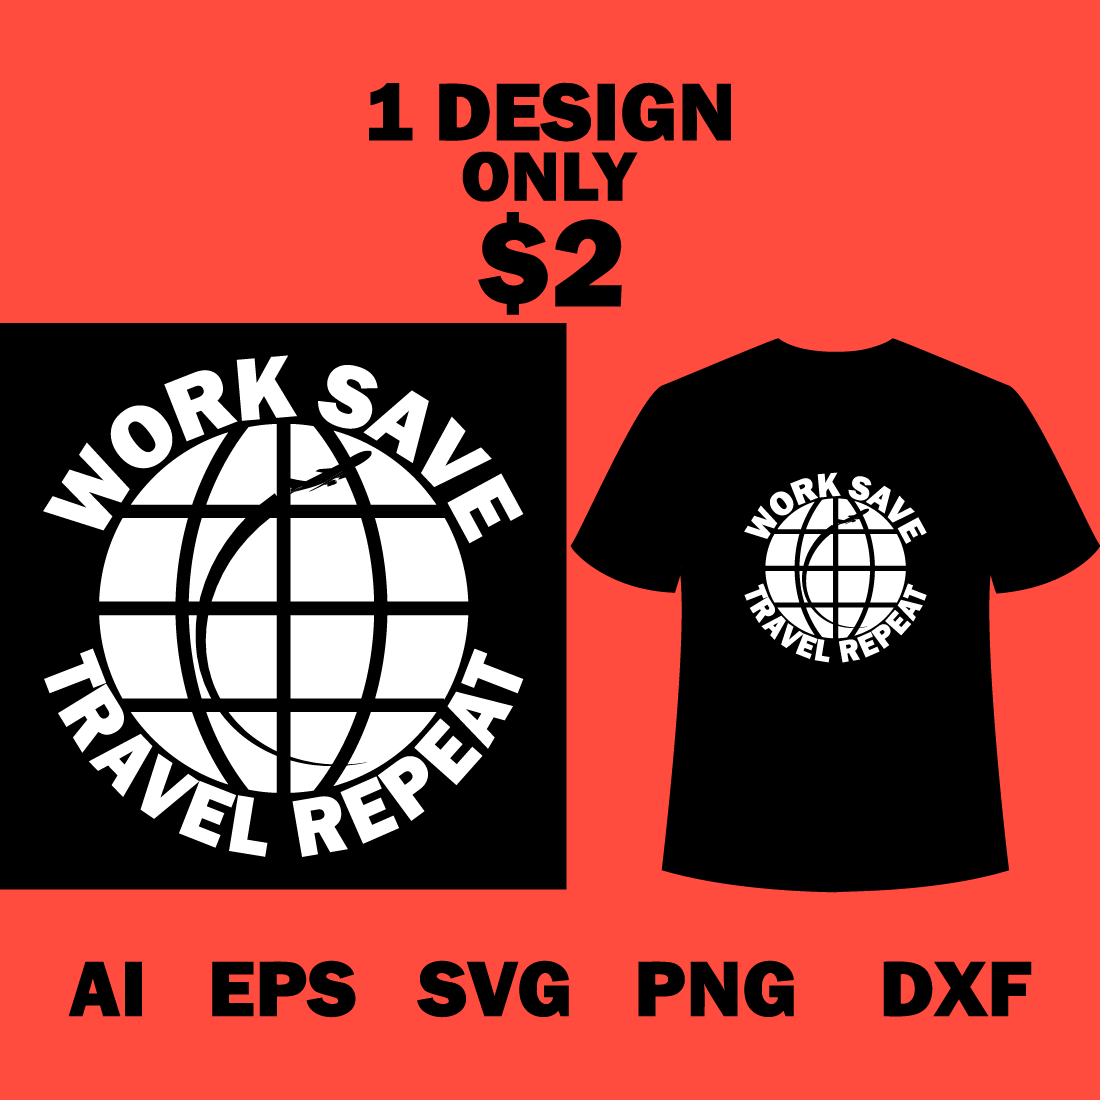 Image of a t-shirt with an irresistible slogan Work Save Travel Repeat